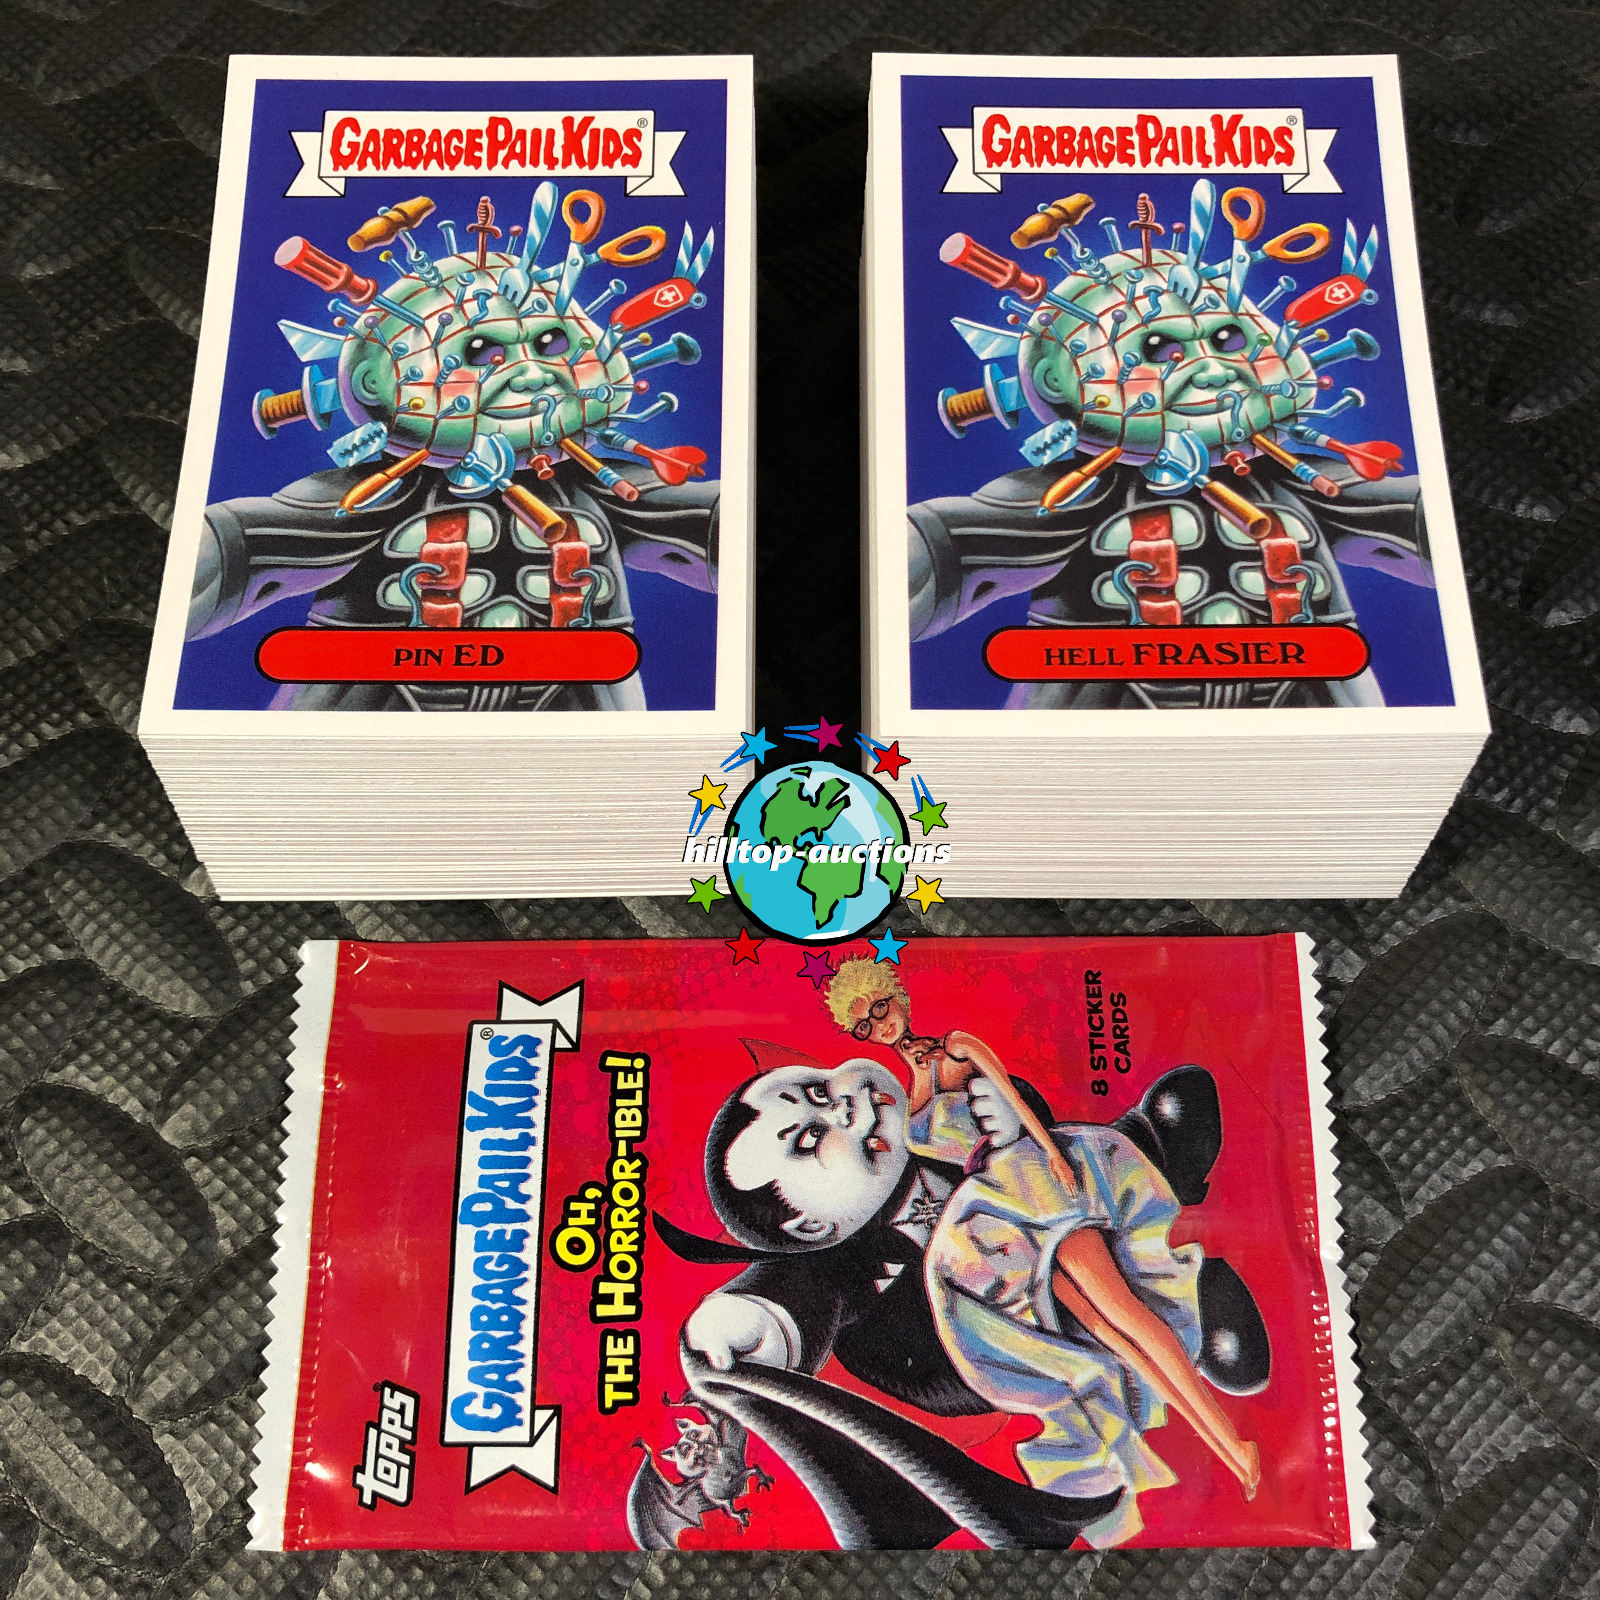 GARBAGE PAIL KIDS OH, THE HORROR-IBLE 2018 COMPLETE 200-CARD BASE SET +WRAPPER